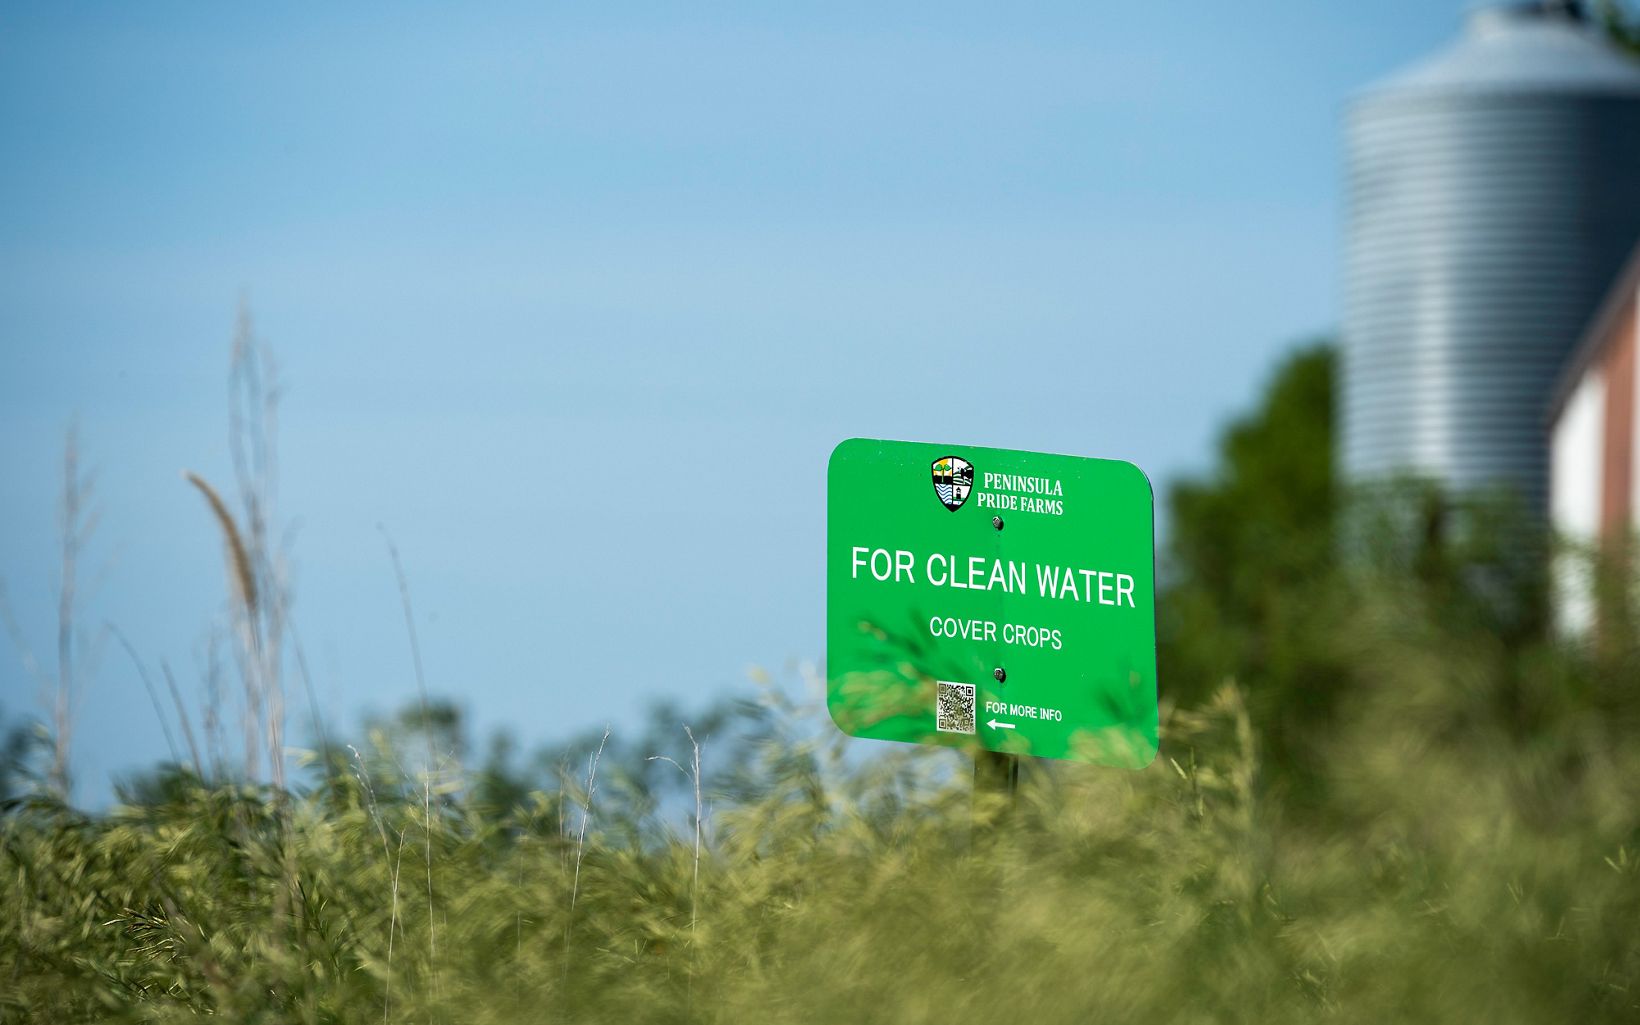 Improving Water Quality A sign announces the work that Peninsula Pride Farms is doing to improve water quality in Kewaunee and southern Door counties.  © Patrick Flood Photography LLC